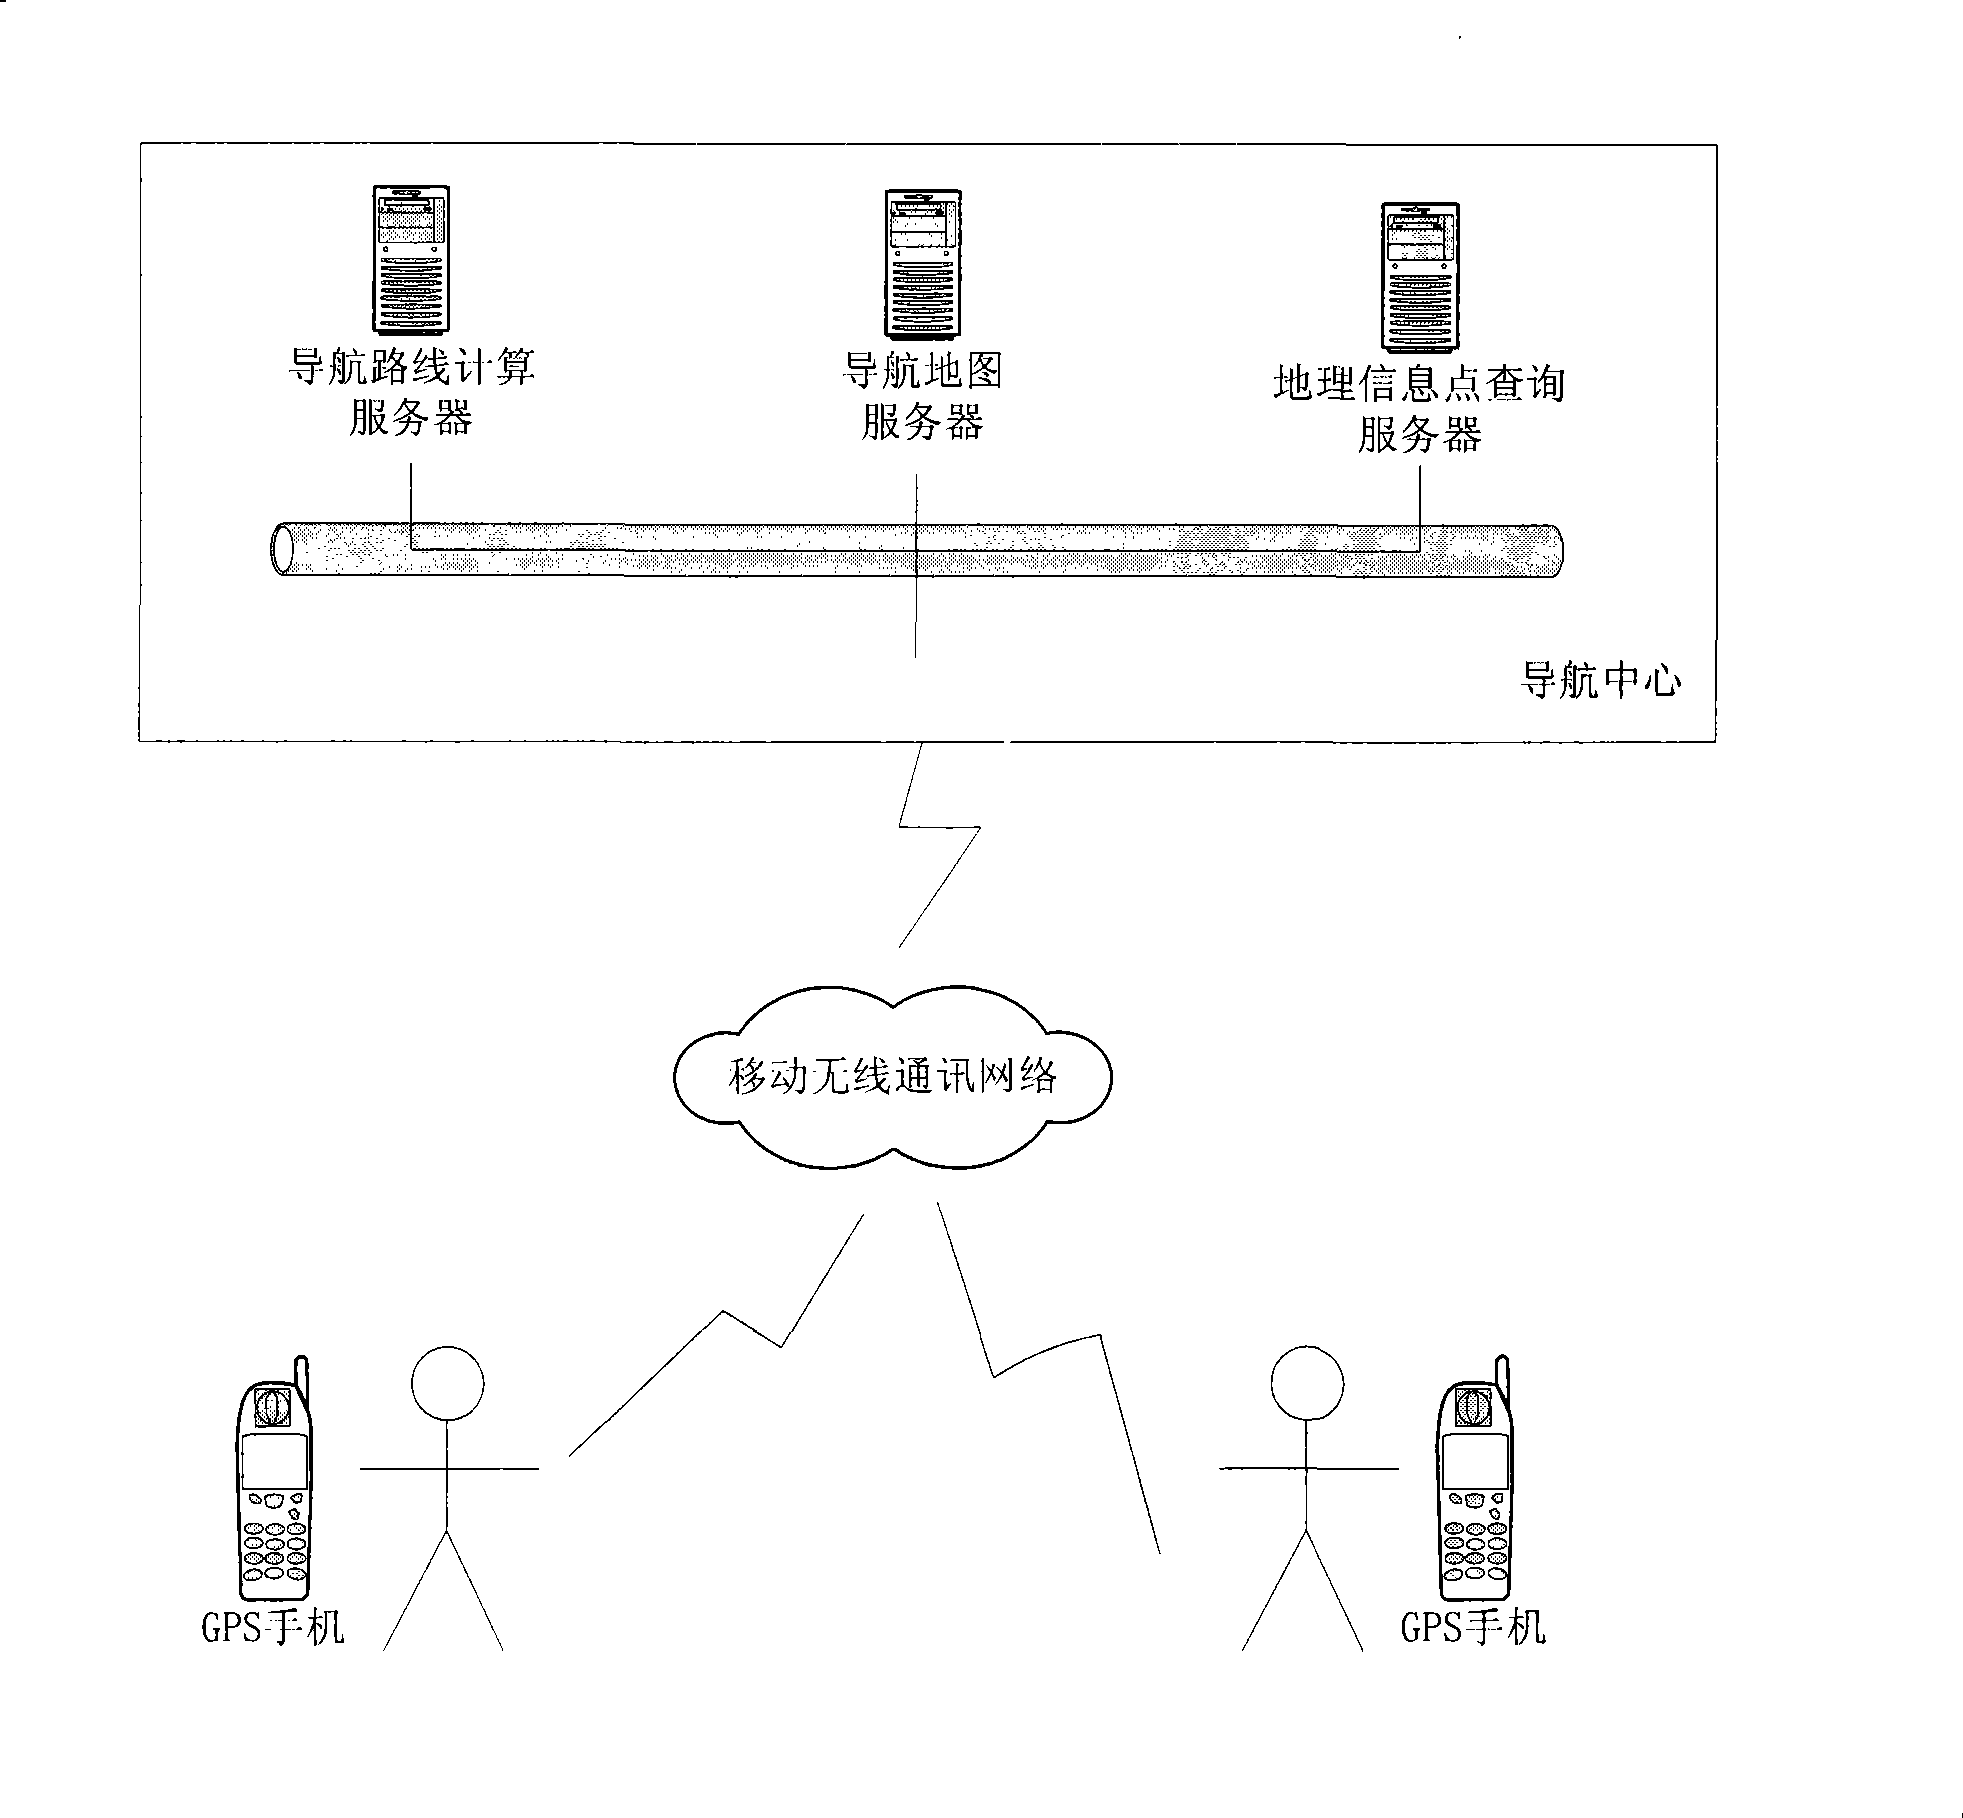 Mobile phone network navigation circuit planning and processing method